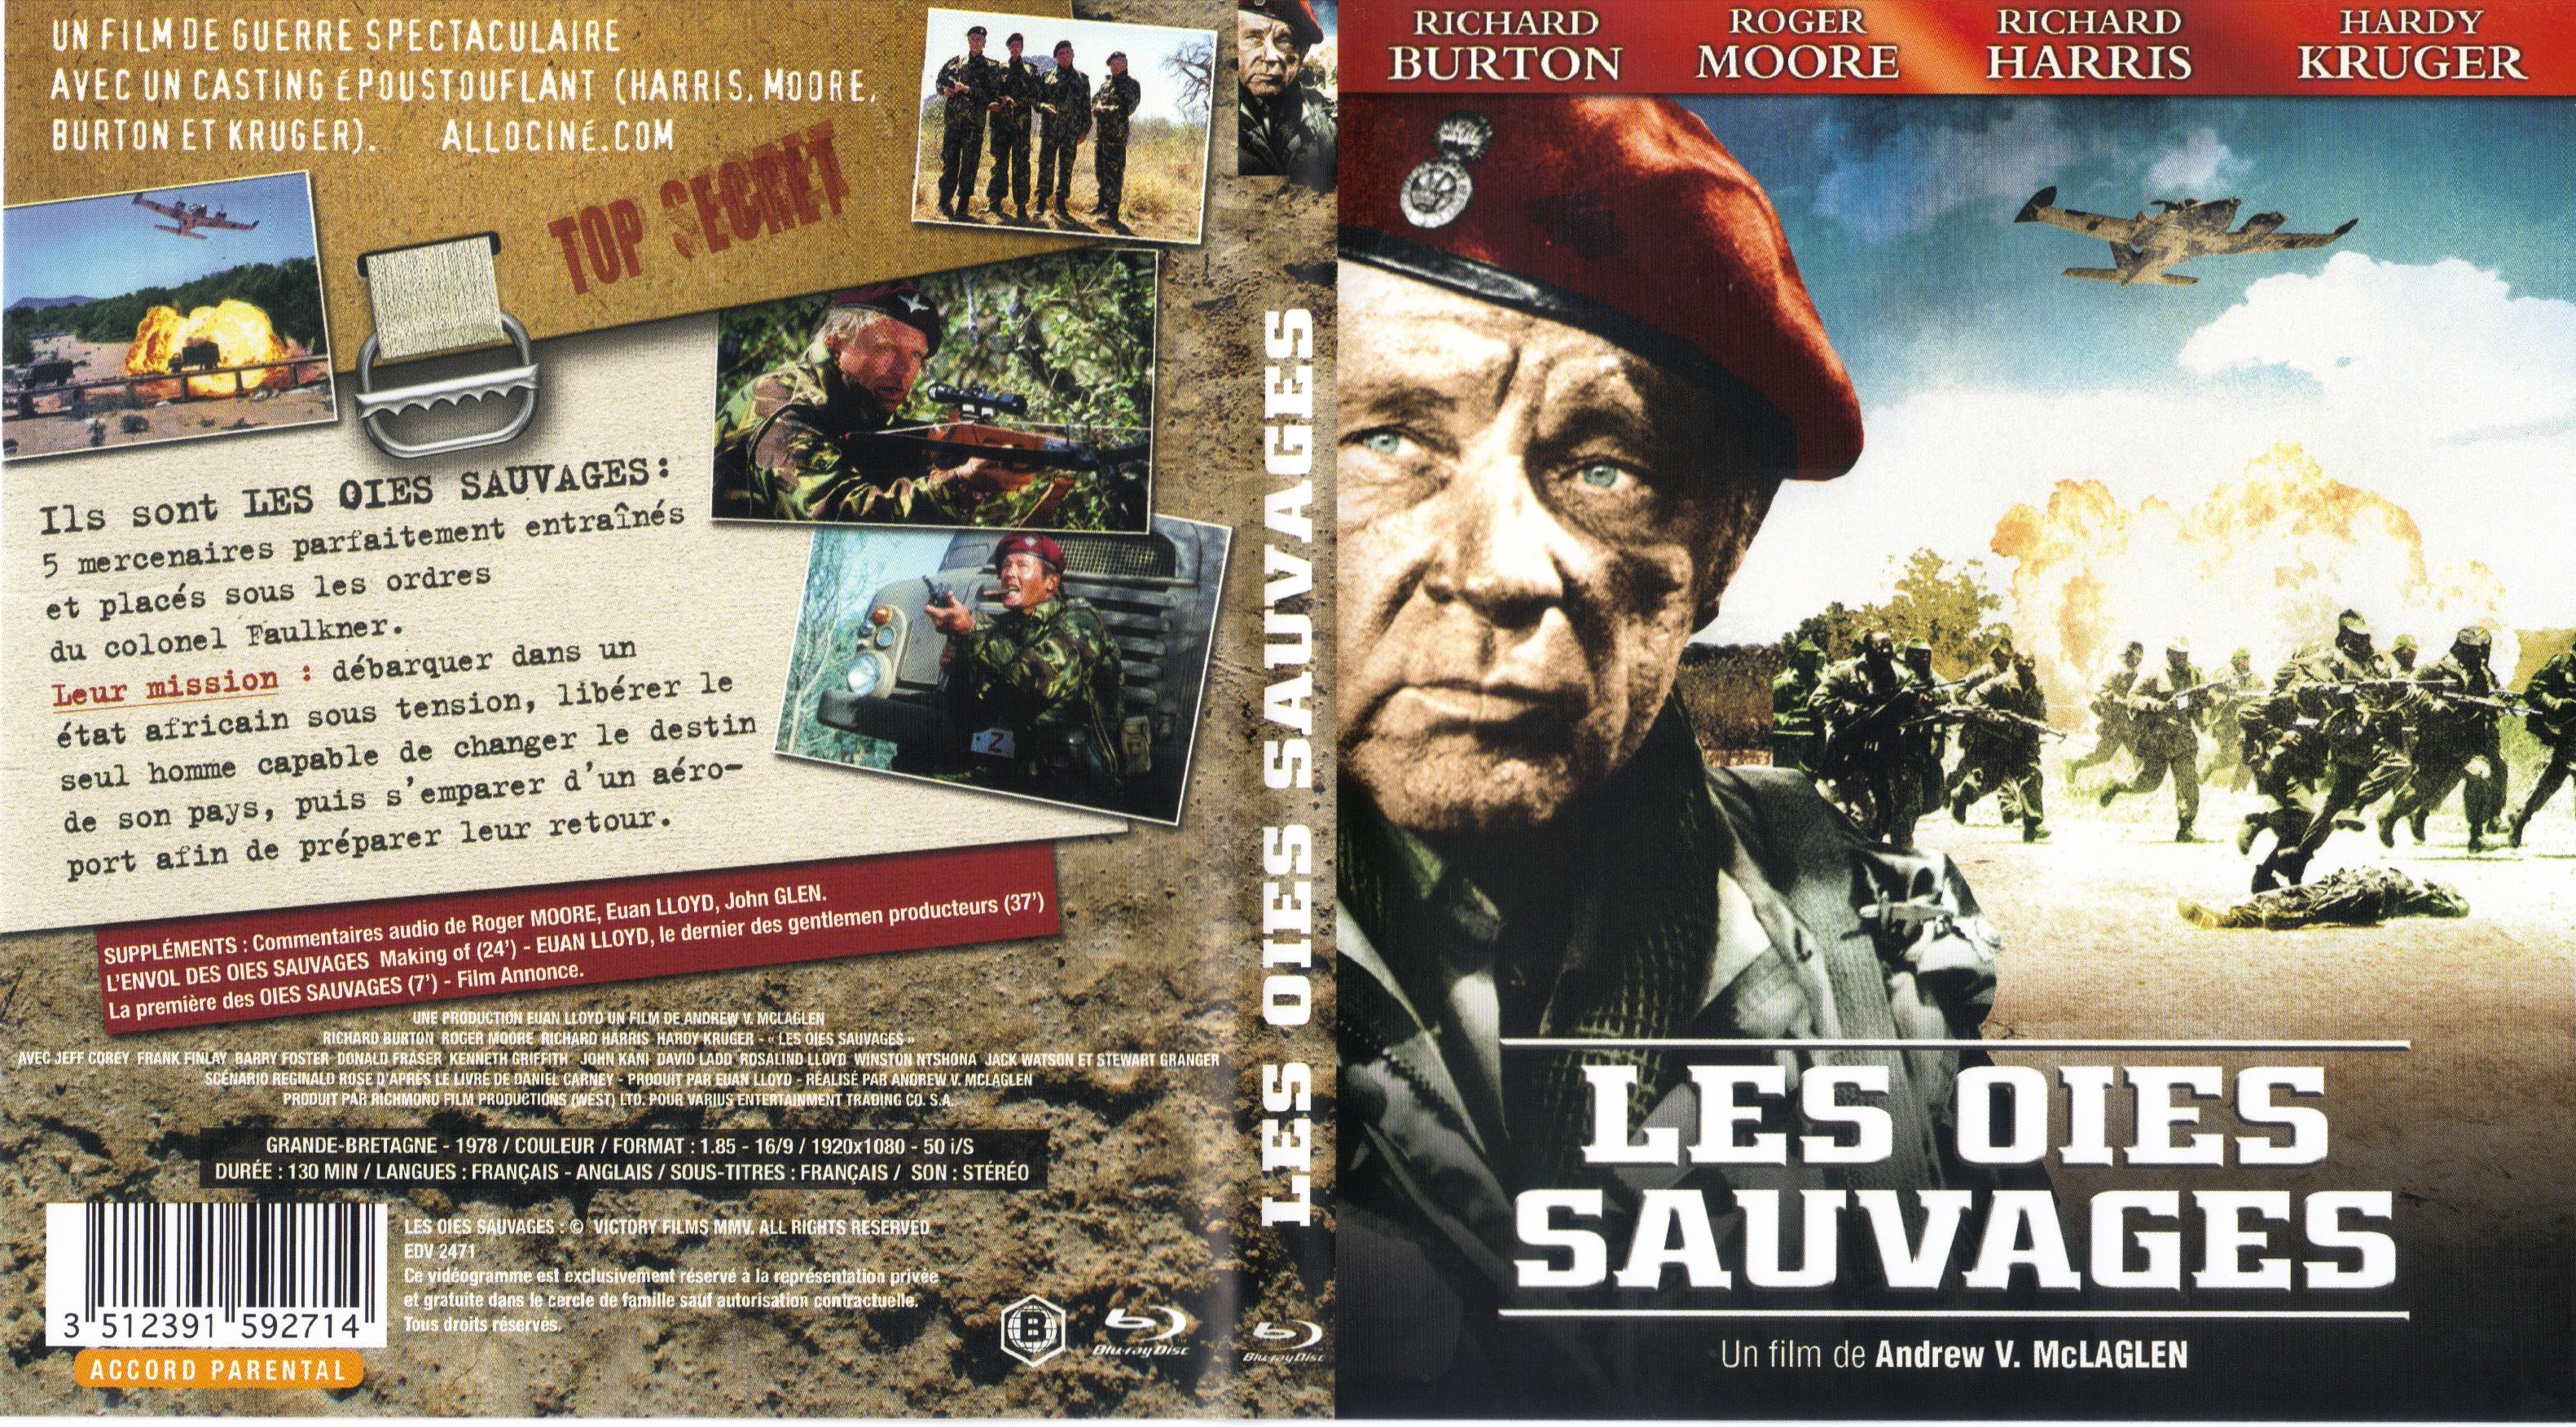 Jaquette DVD Les Oies sauvages (BLU-RAY)